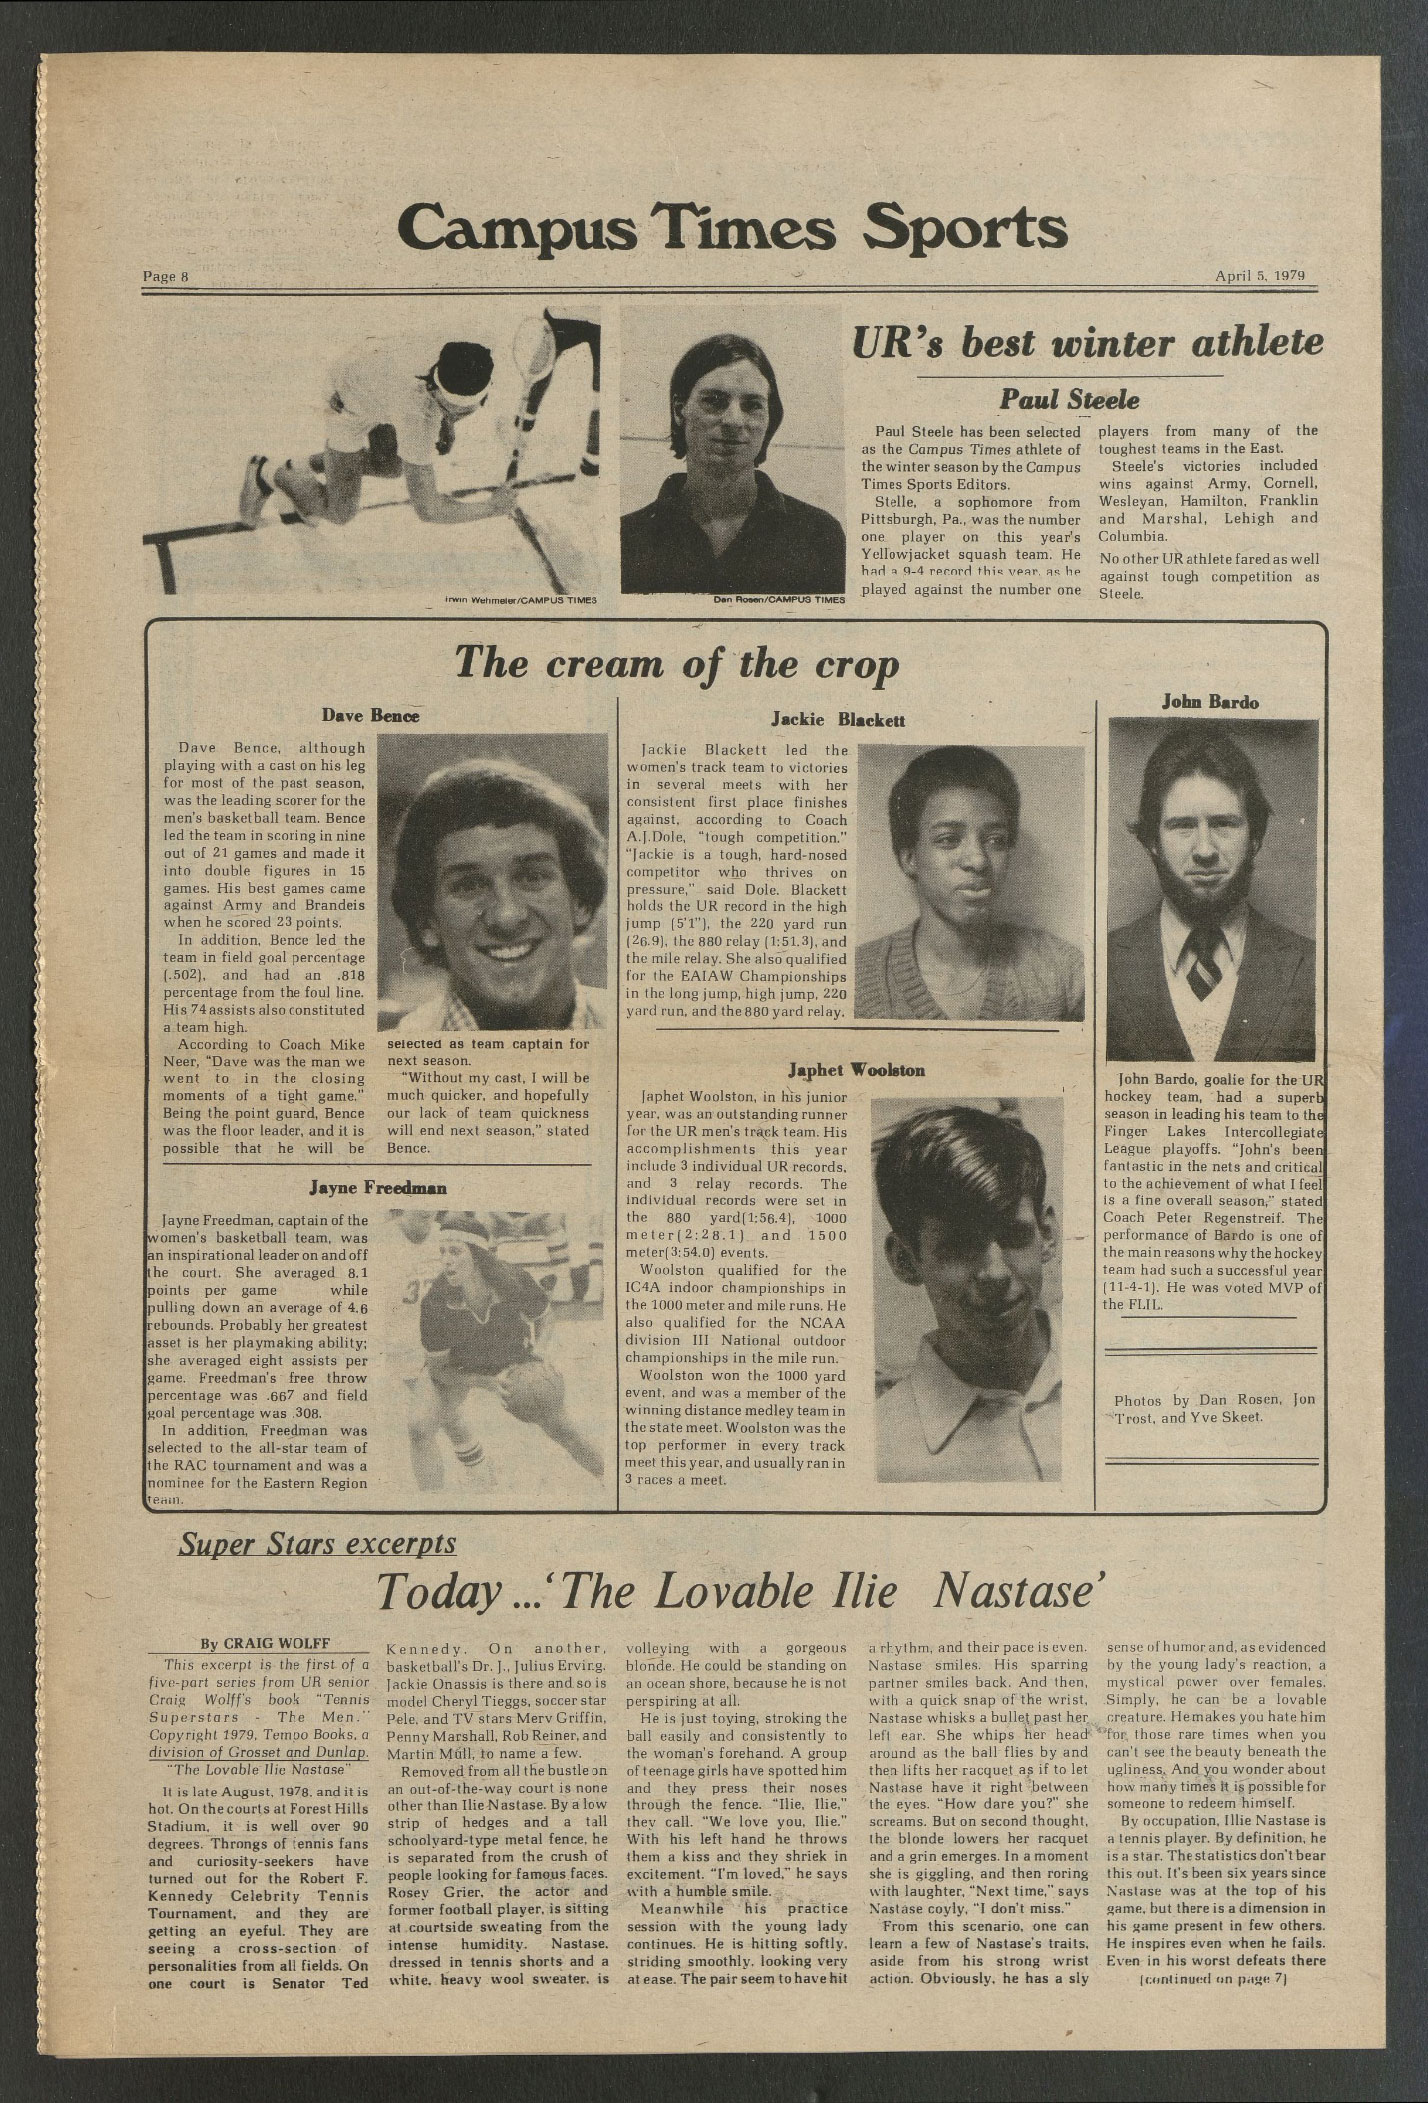 A scan of an article featuring Jackie Blackett ’81 from Campus Times on April 5, 1979.